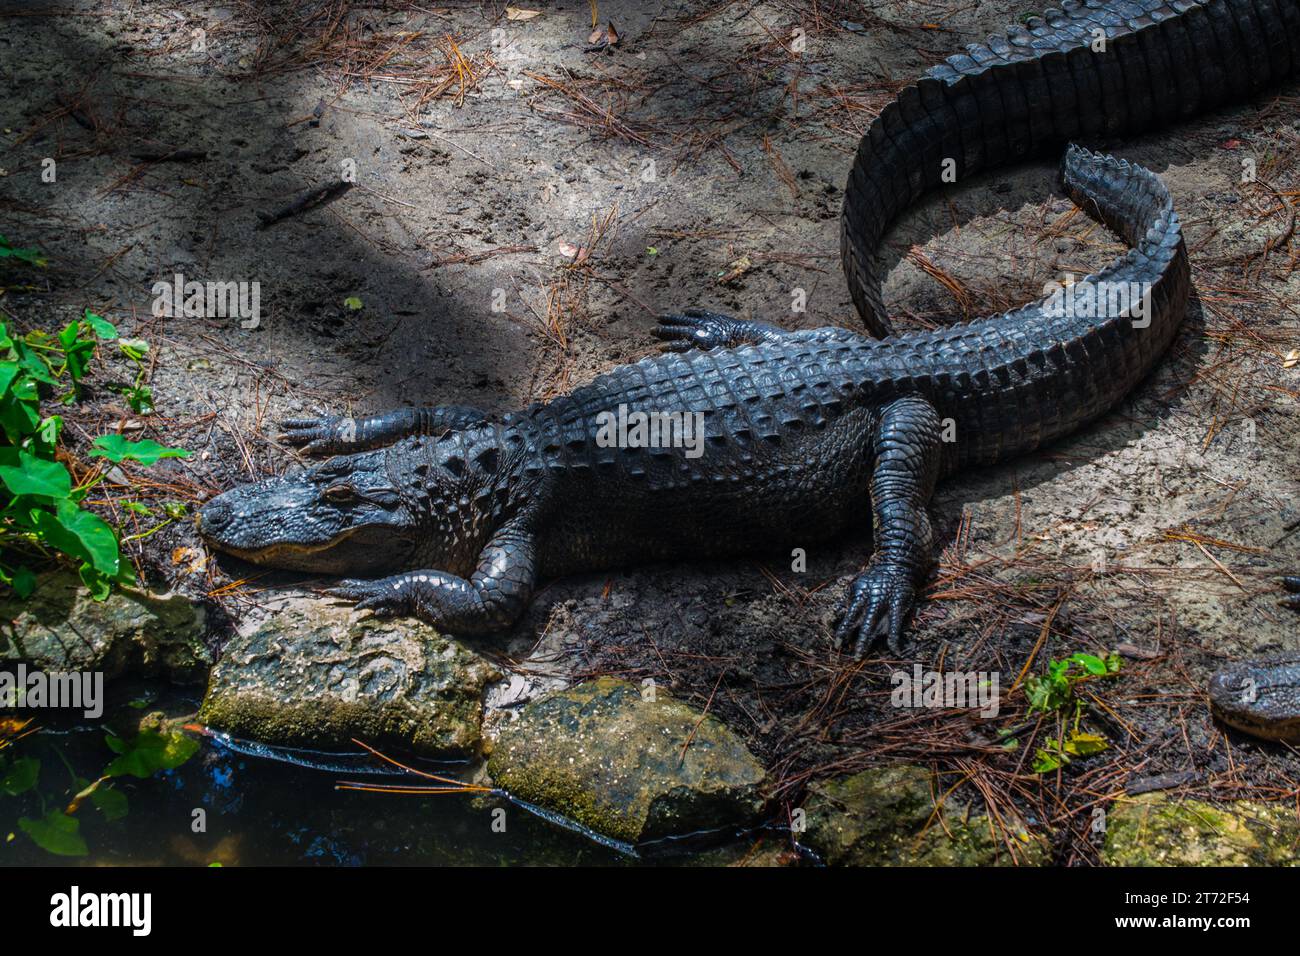 Alligator in the sand from above Stock Photo